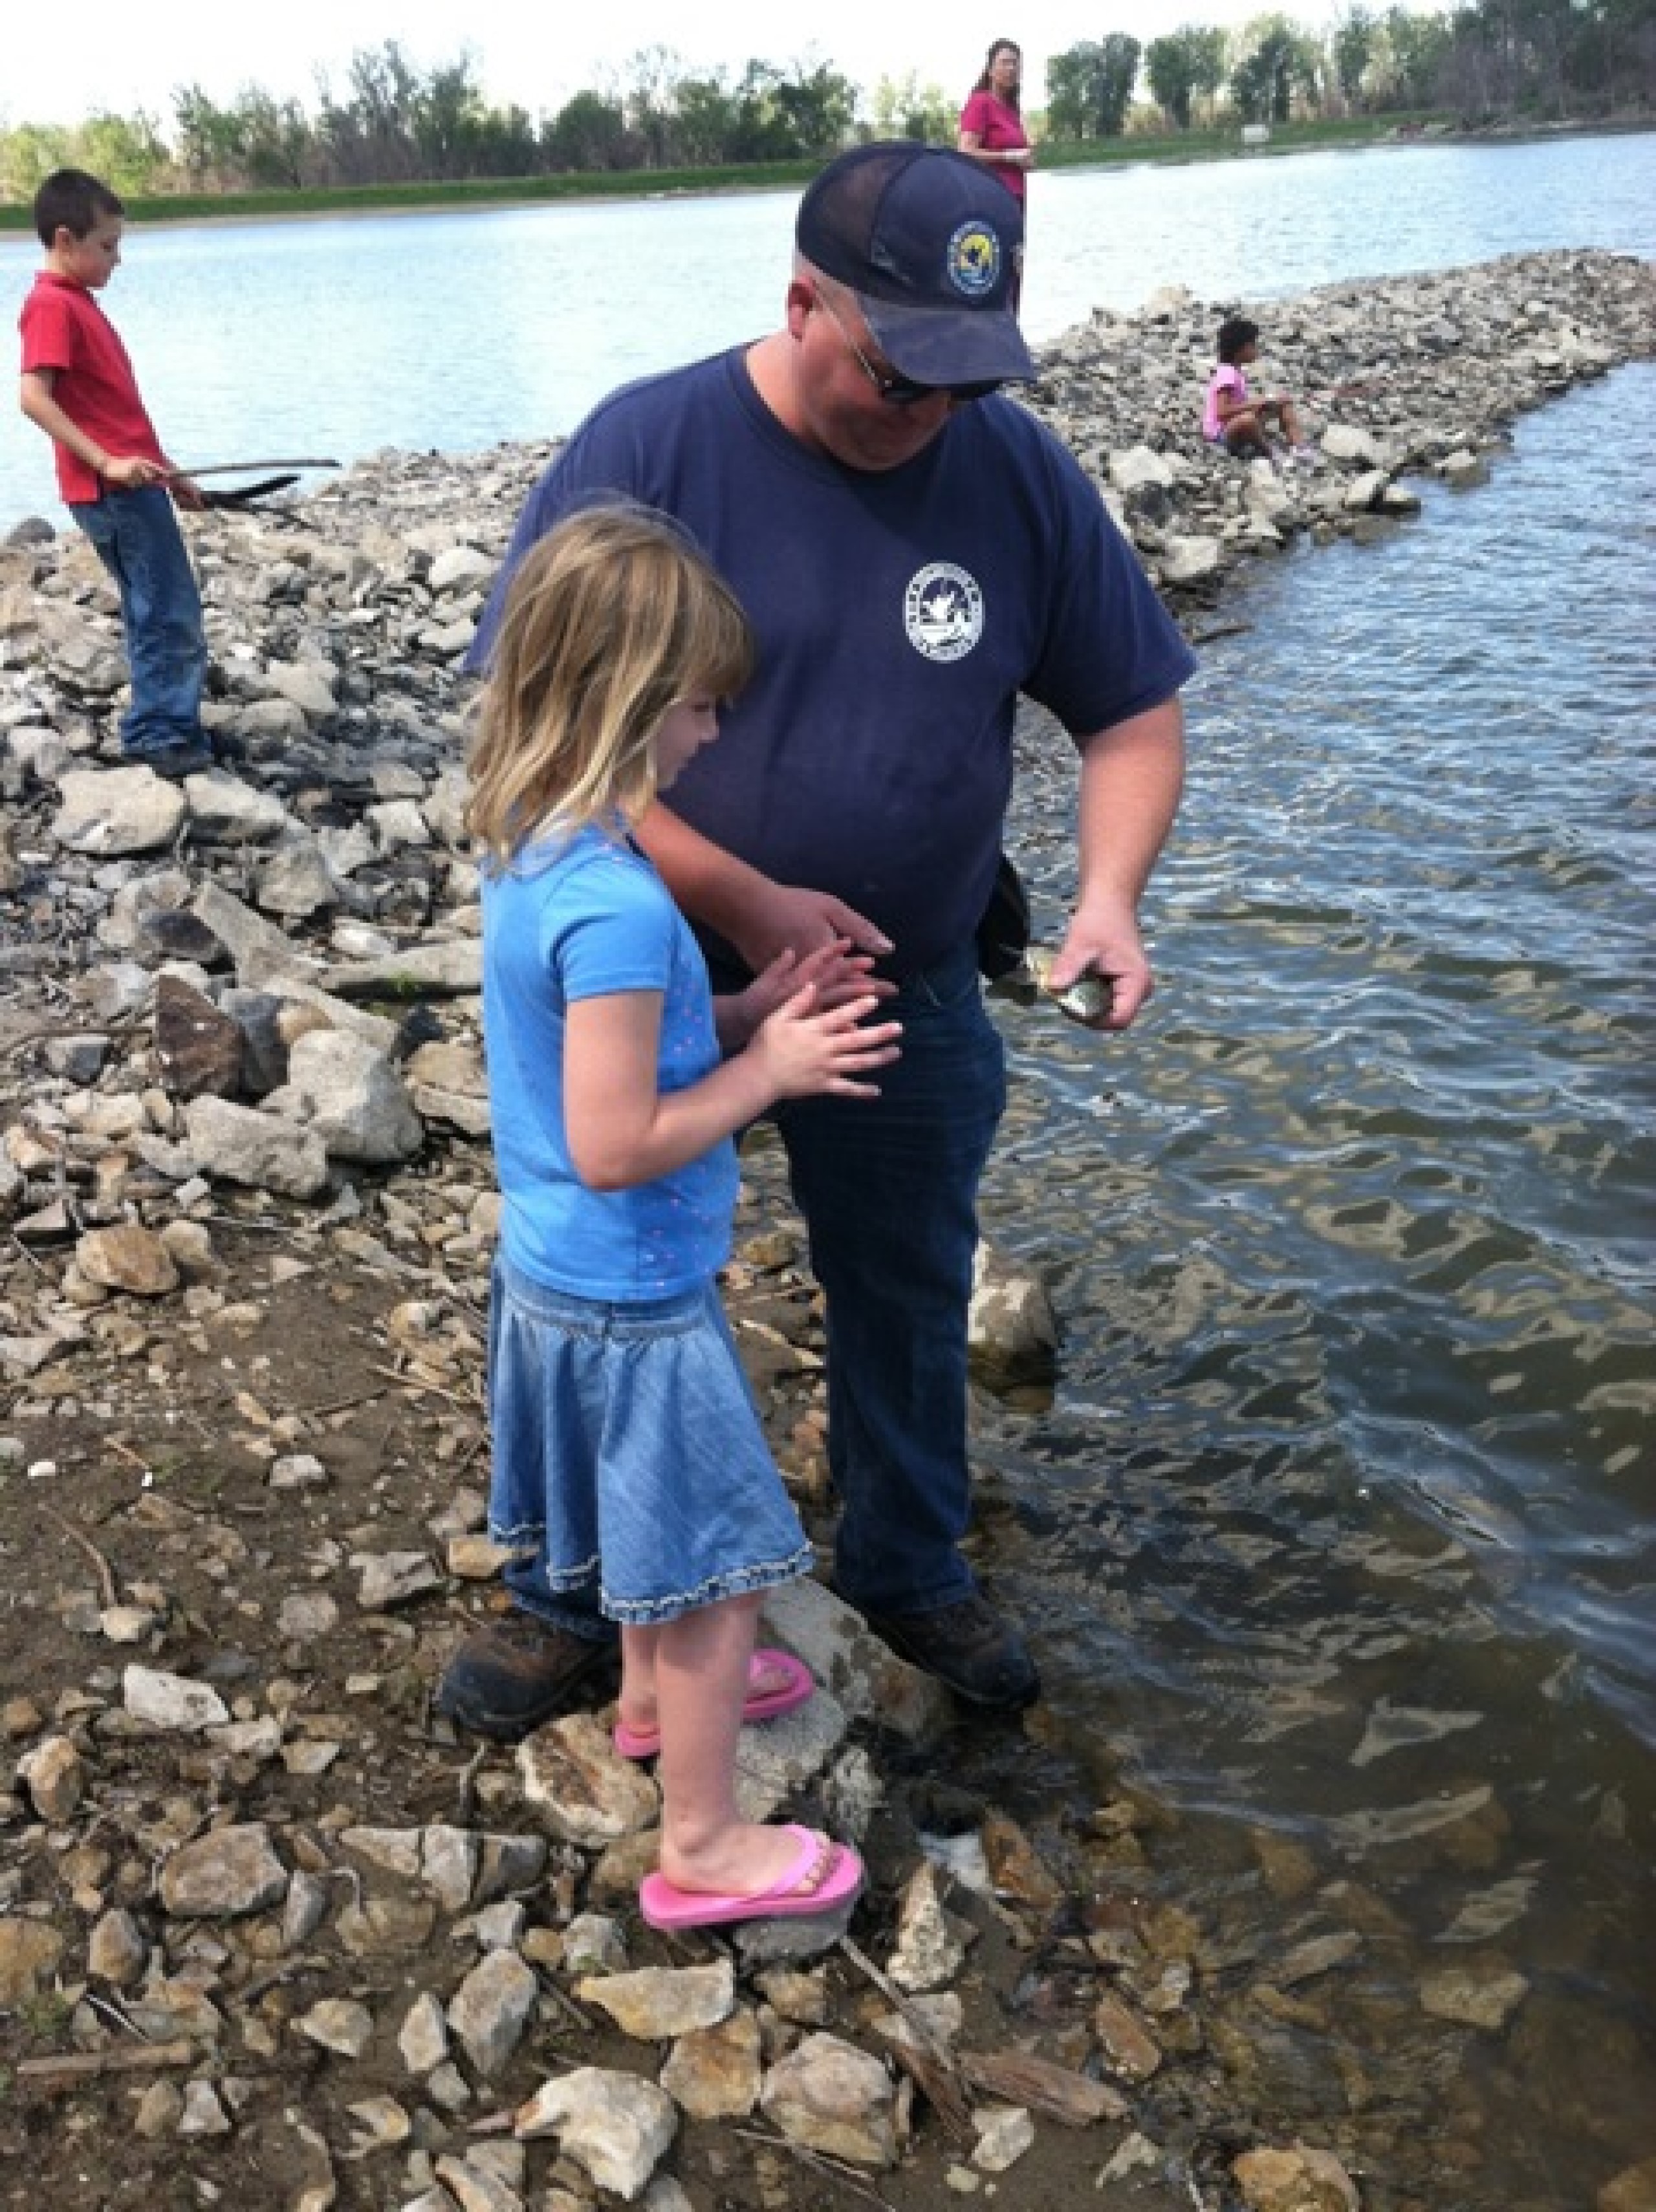 A refuge volunteer helping a young girl fix her fishing pole on a rocky shoreline.